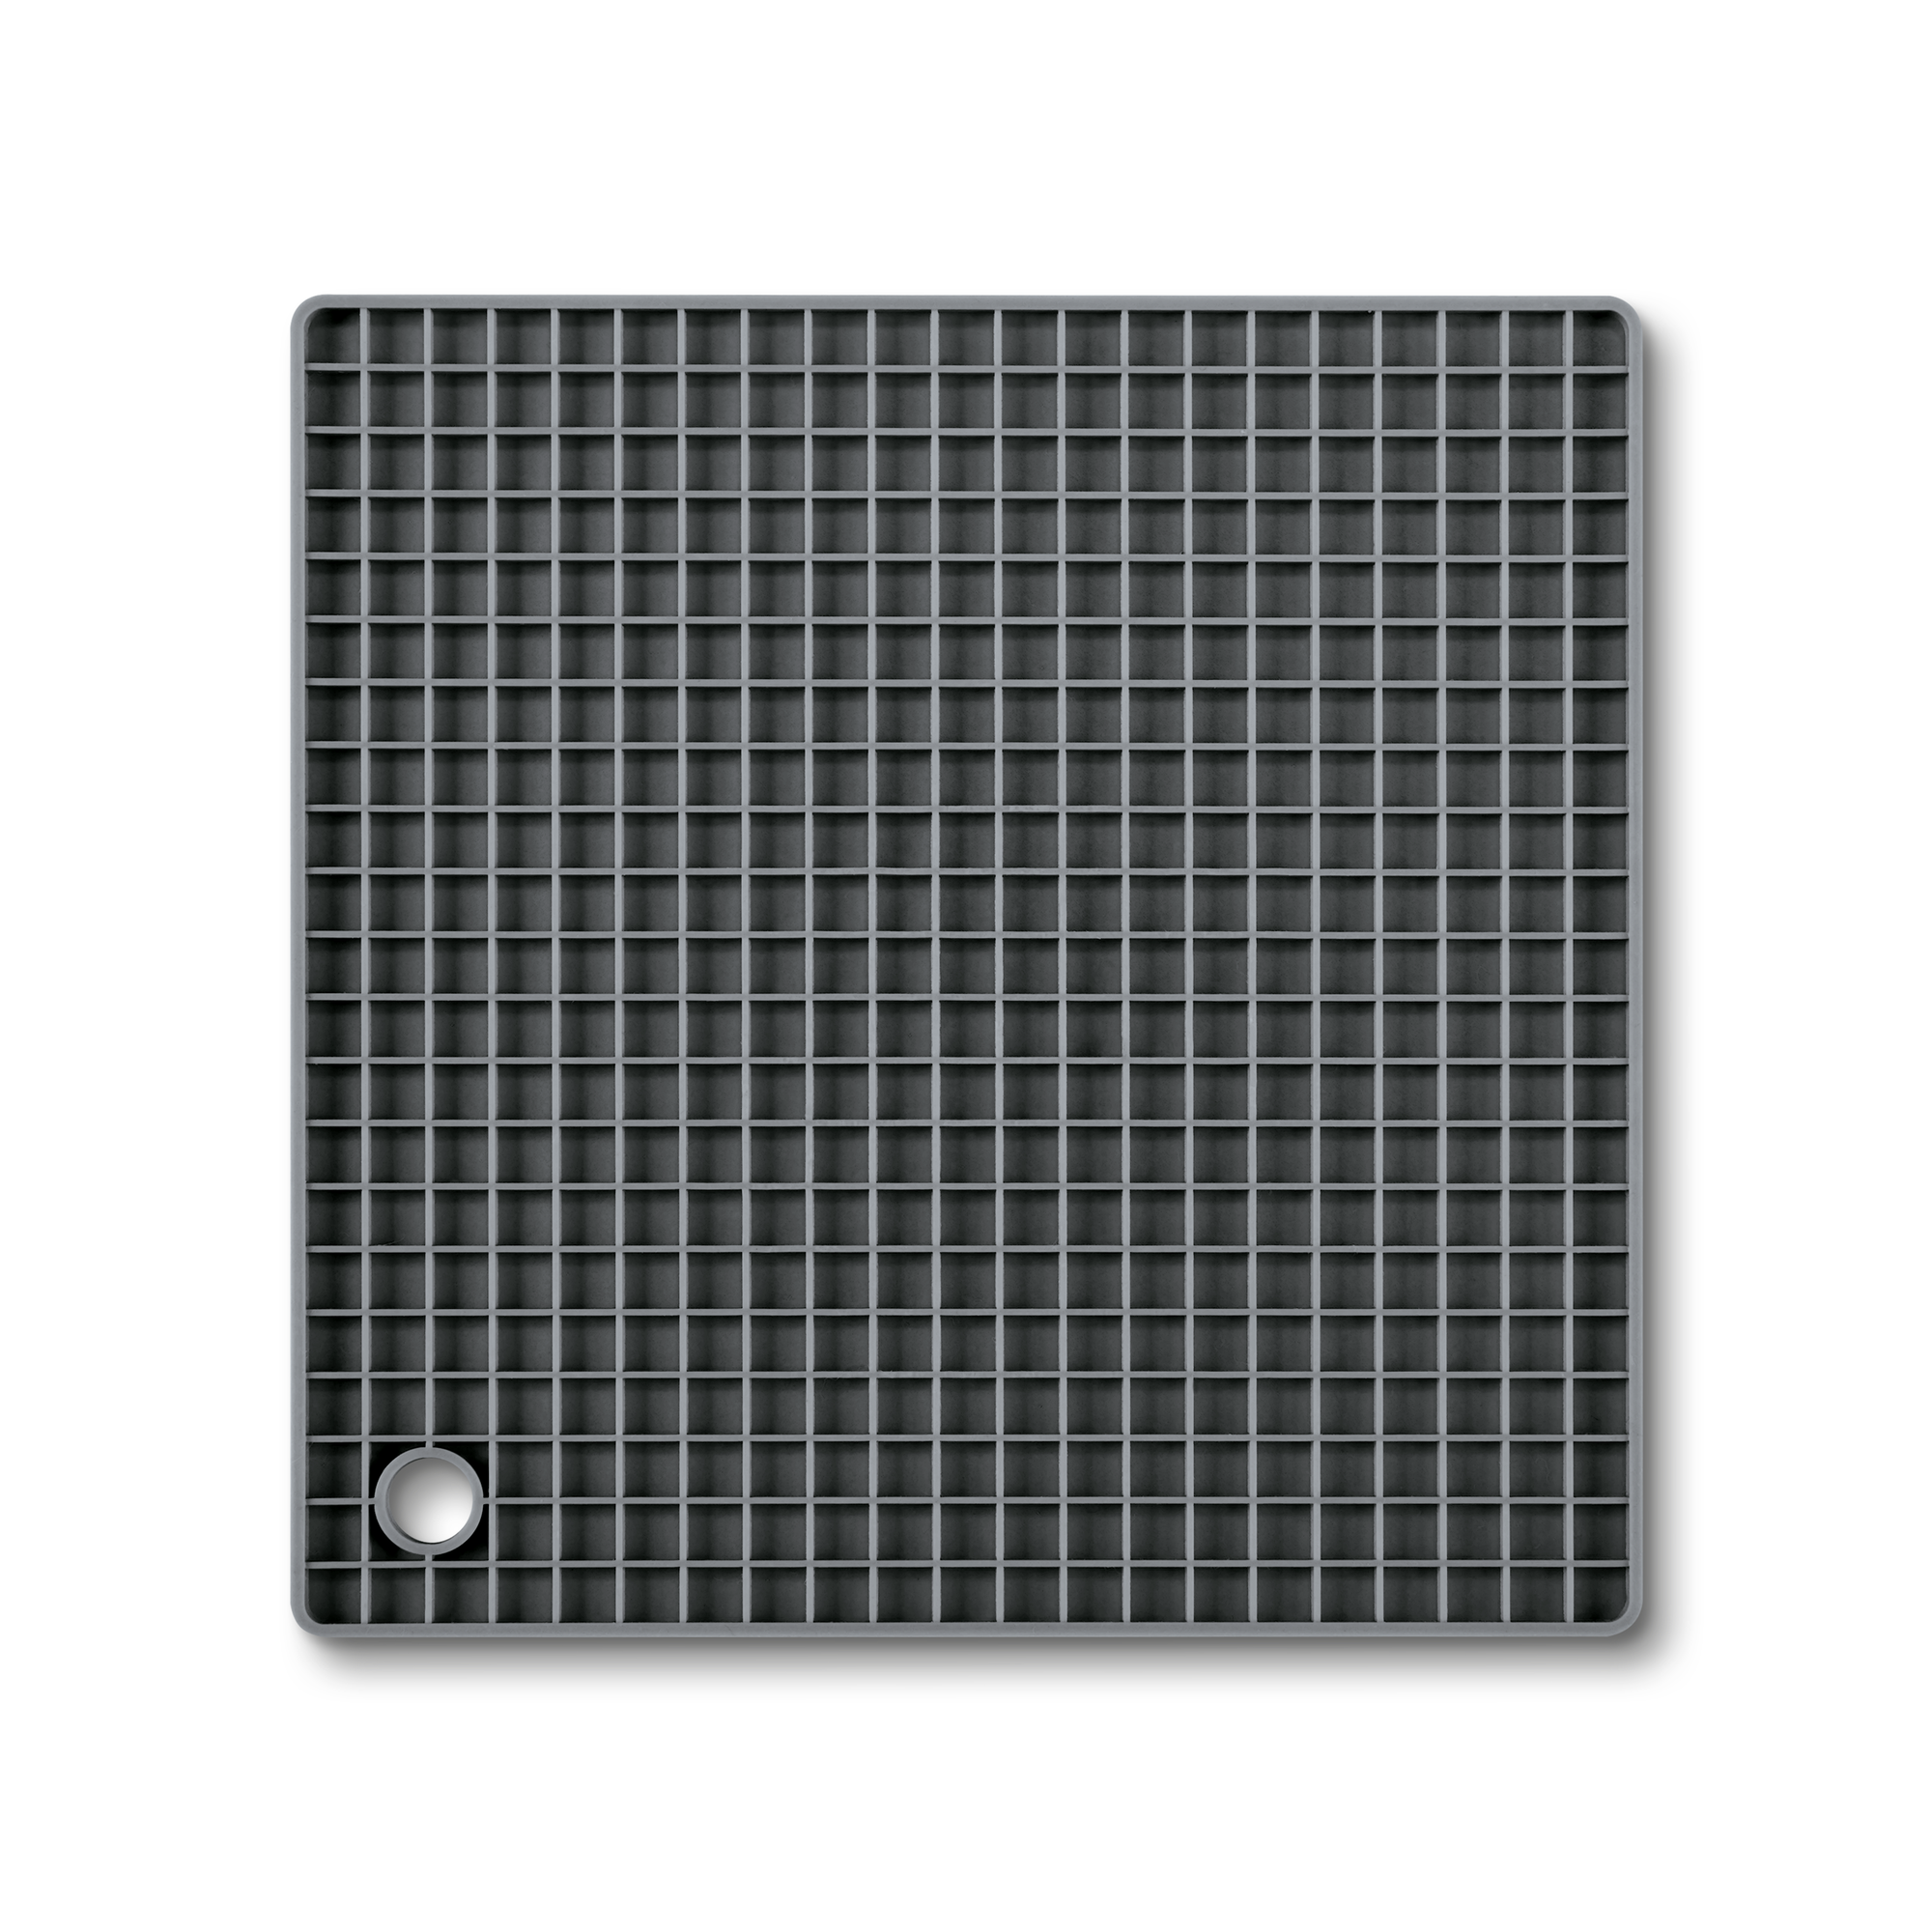 3/4 view, gray silicone trivet showing grid pattern and hanging hole.